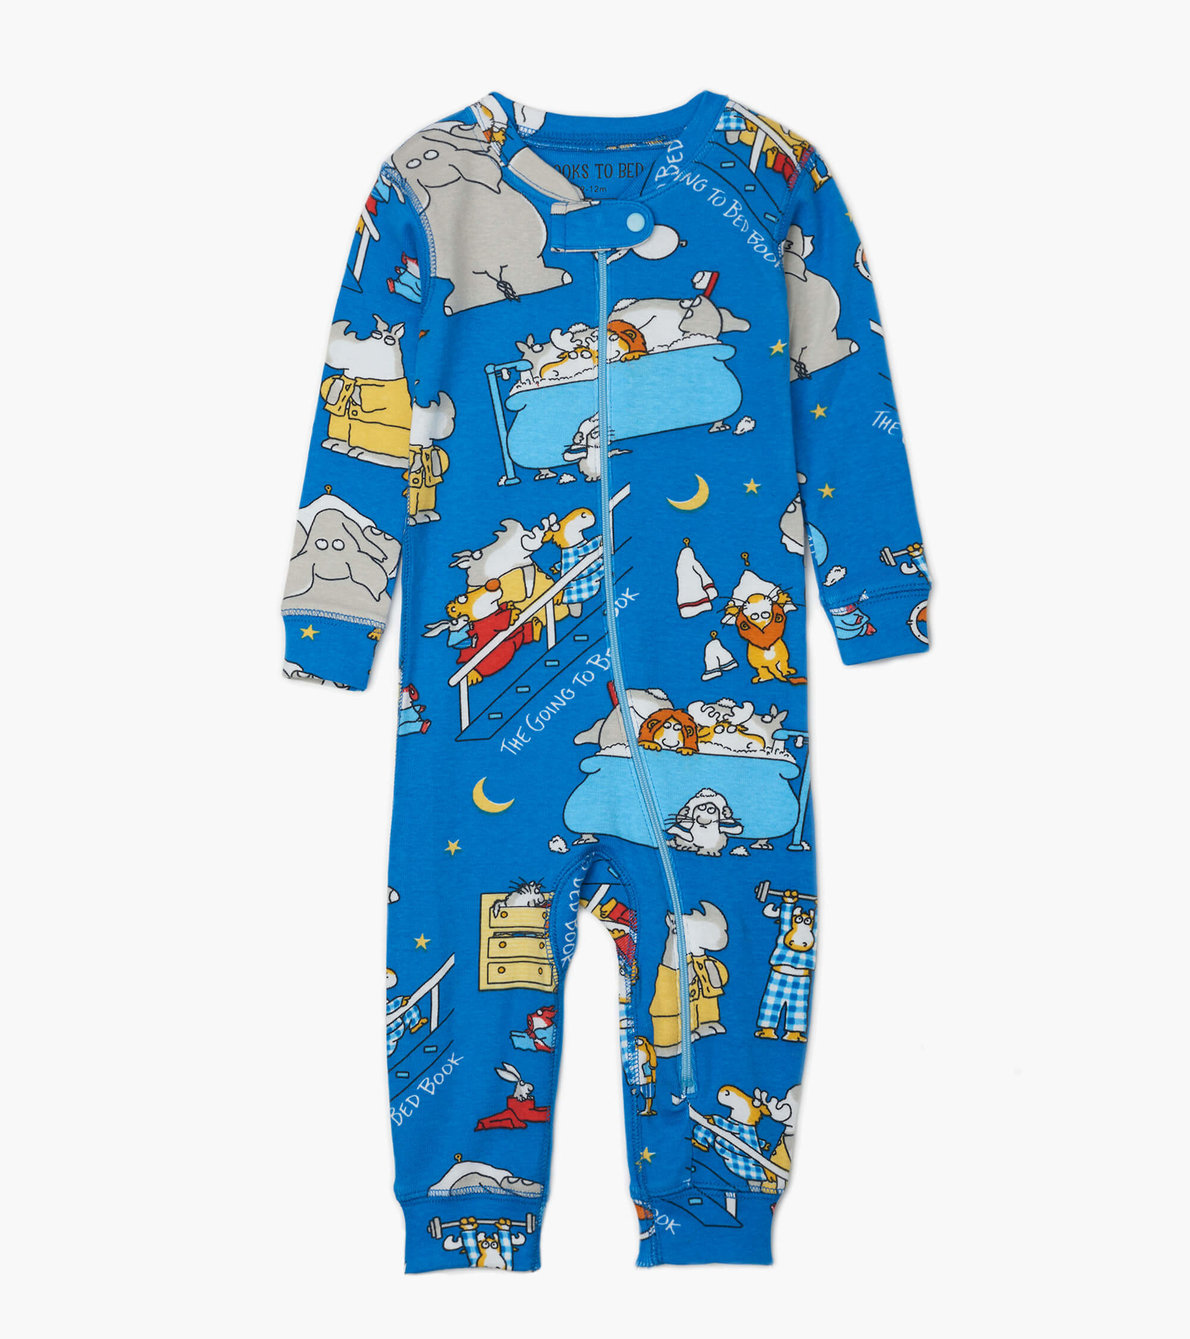 View larger image of Going to Bed Infant Coverall